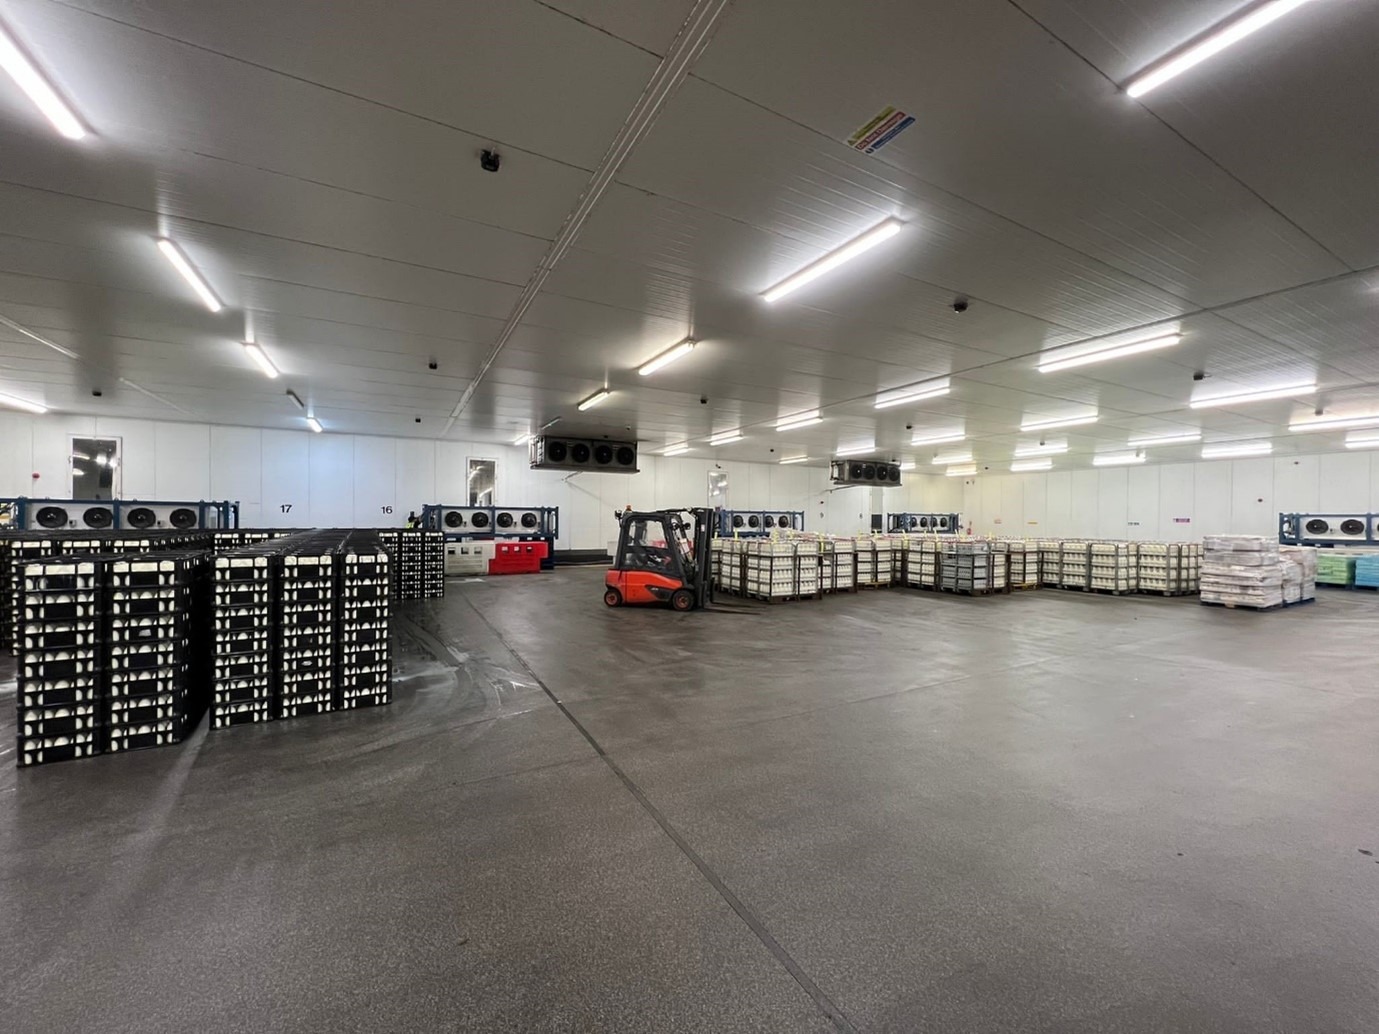 Dairy Case Study - Contingency Planning at Its Finest - inside a chilled warehouse